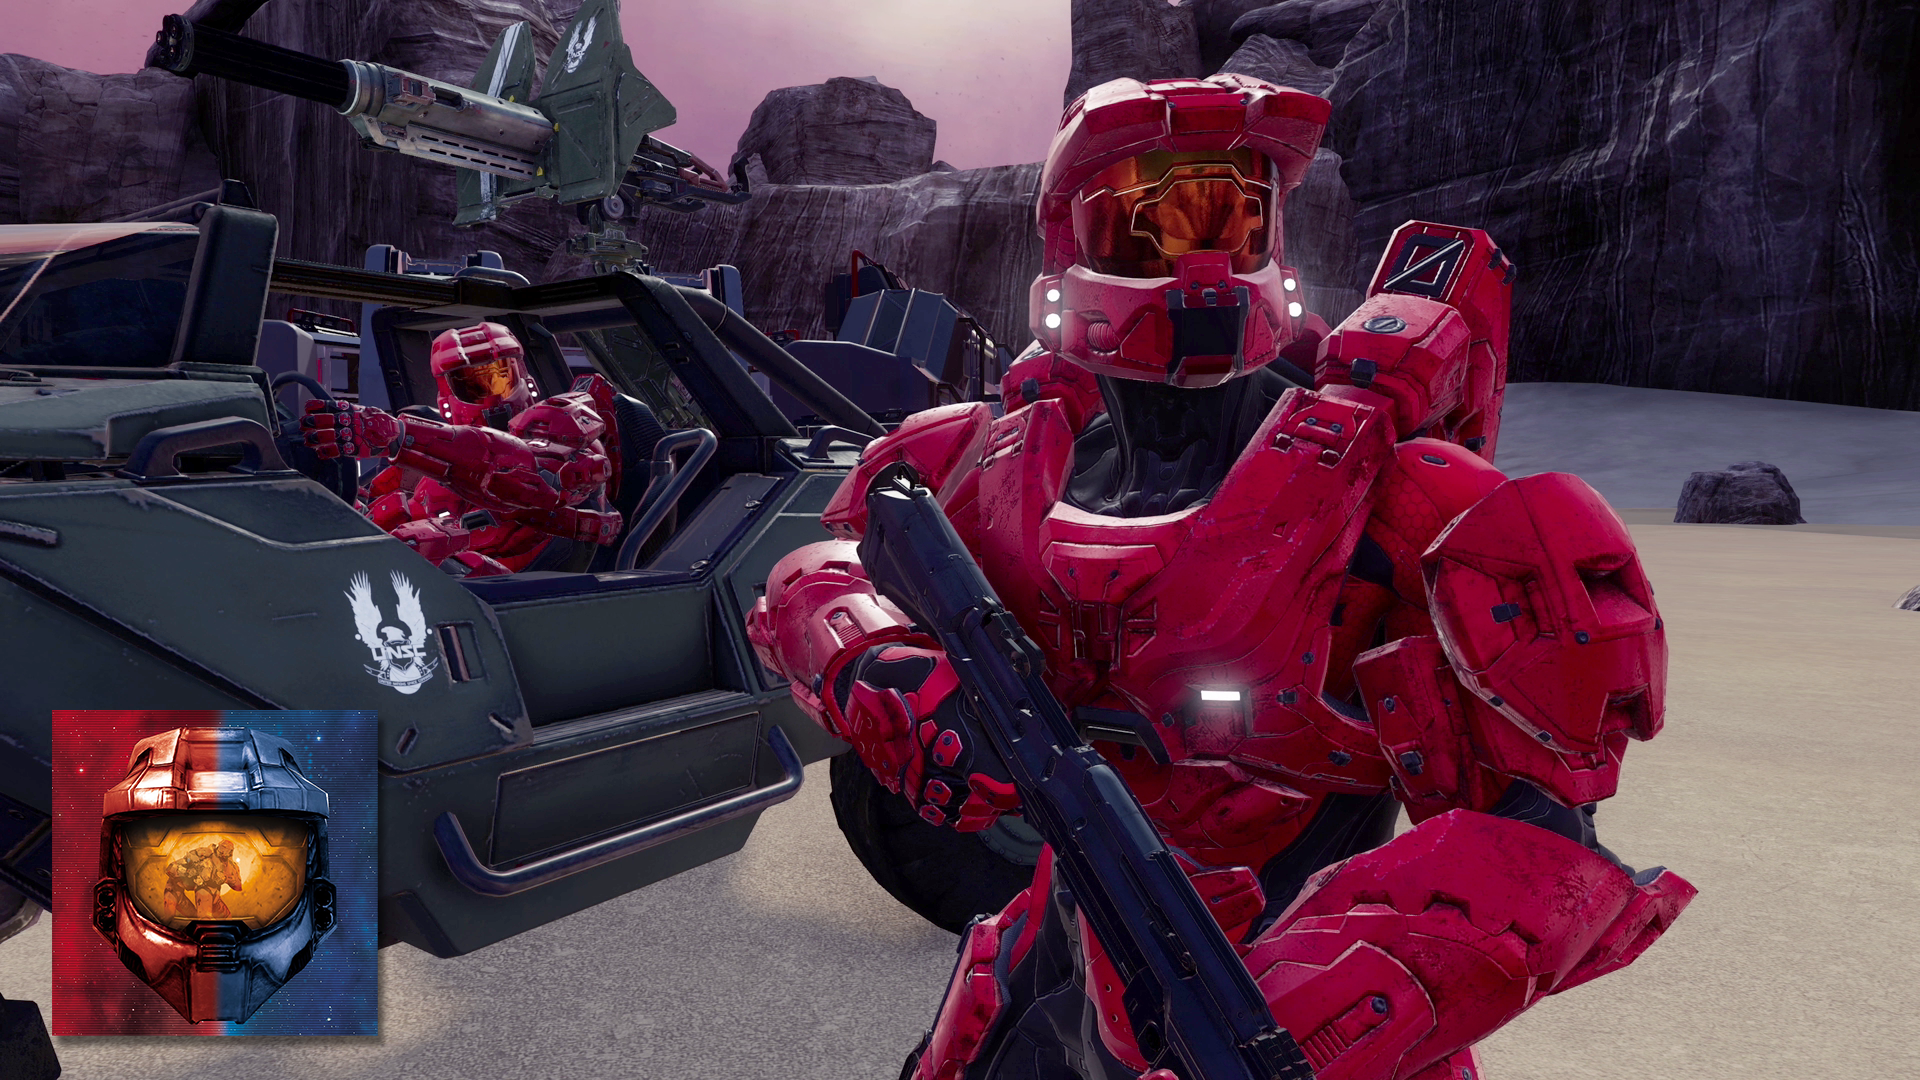 Red vs. Blue: Halo Recap, Episodes 6-8 - Rooster Teeth